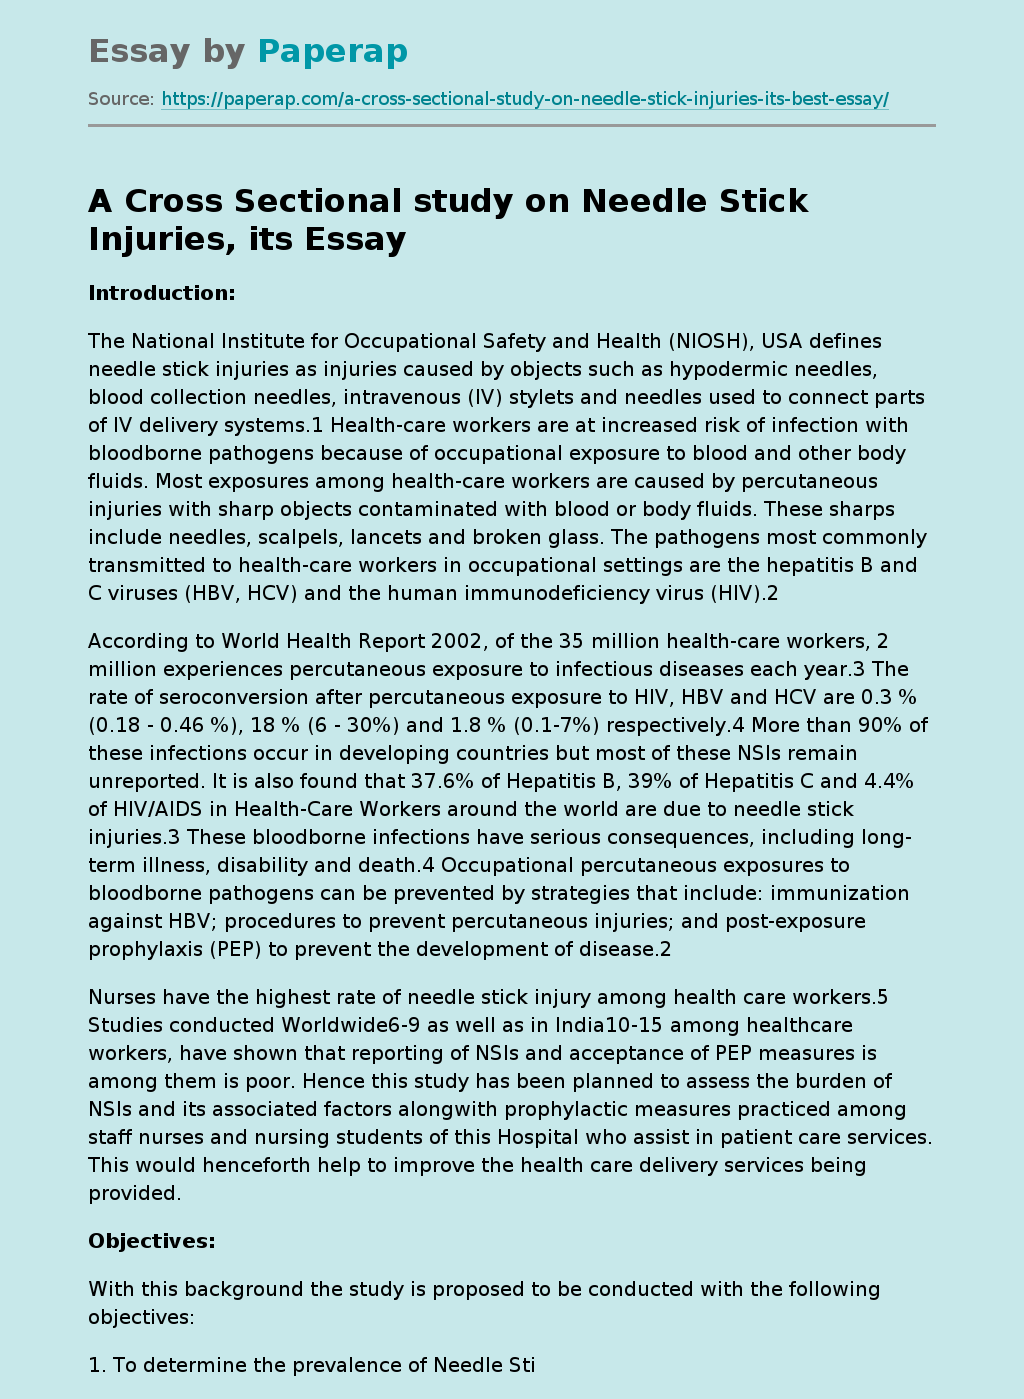 A Cross Sectional study on Needle Stick Injuries, its